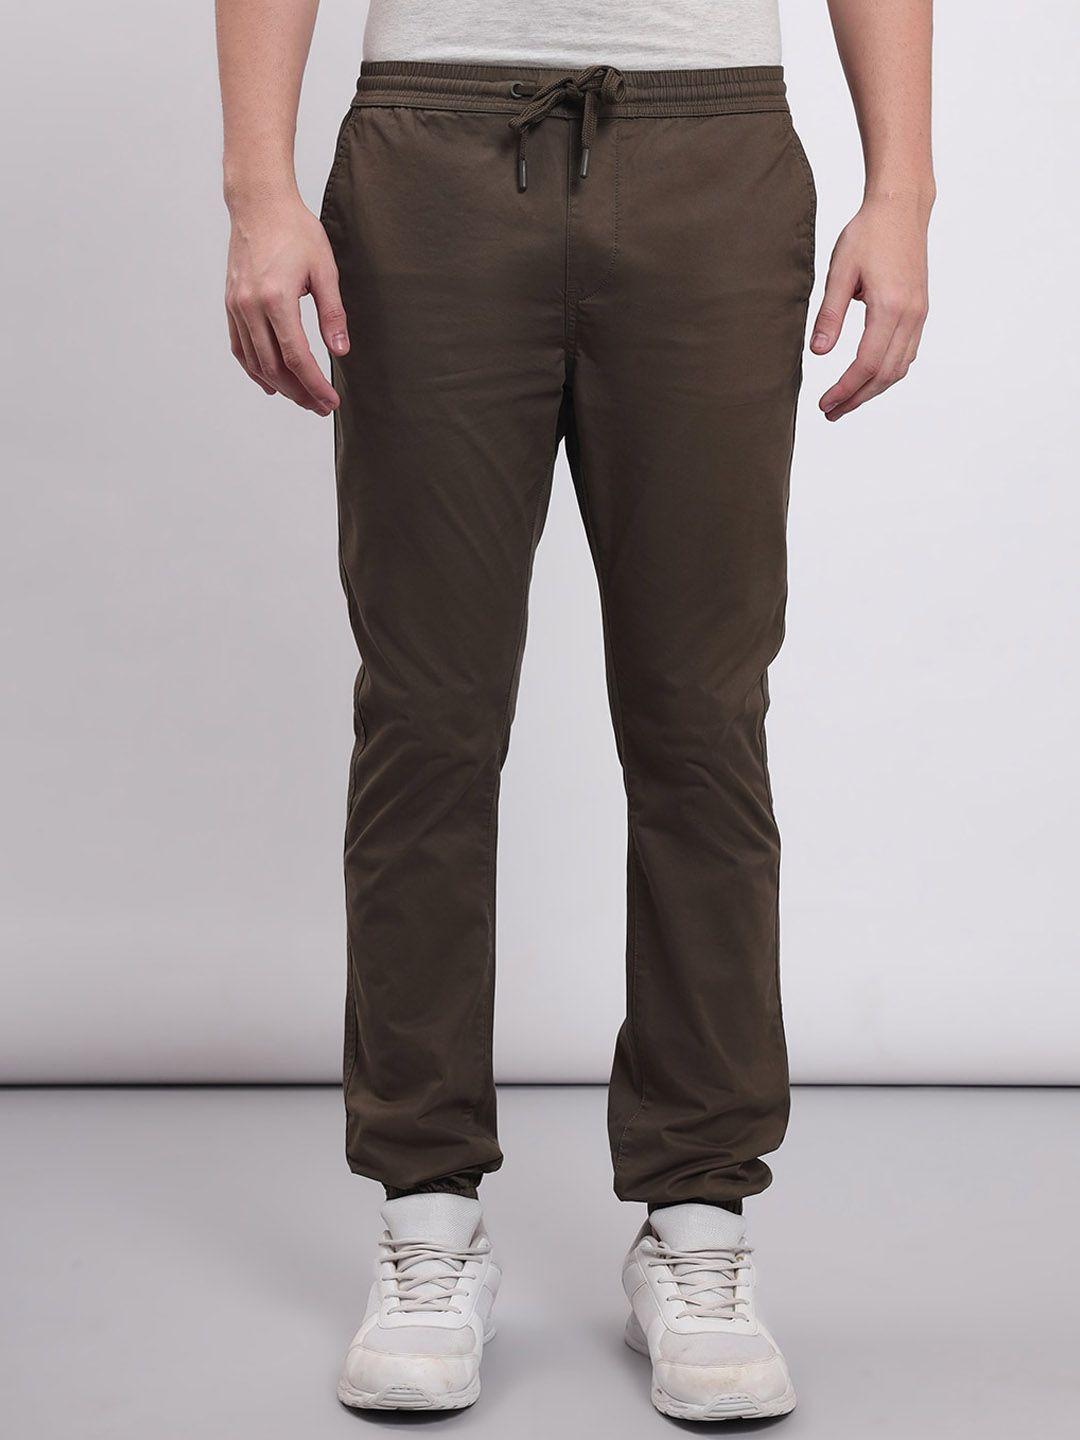 lee-men-relaxed-fit-mid-rise-joggers